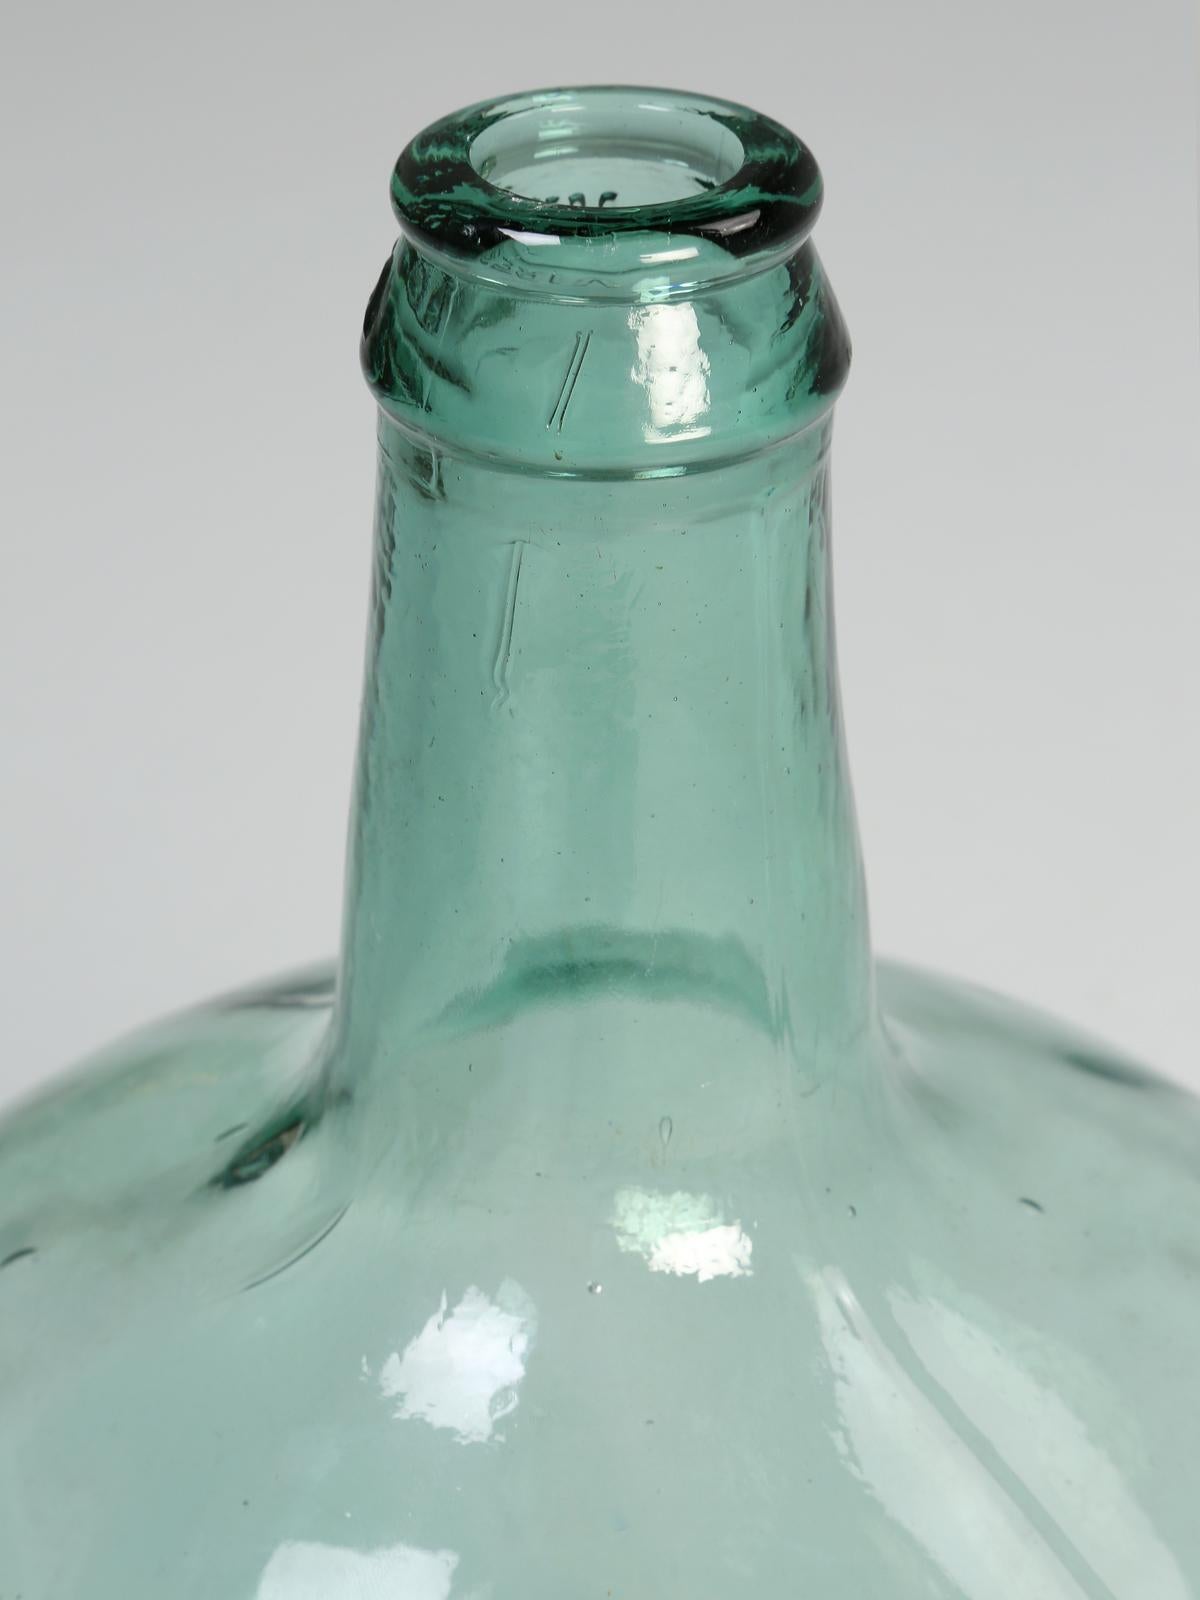 Early 20th Century French Demijohn or Carboy Glass Bottle